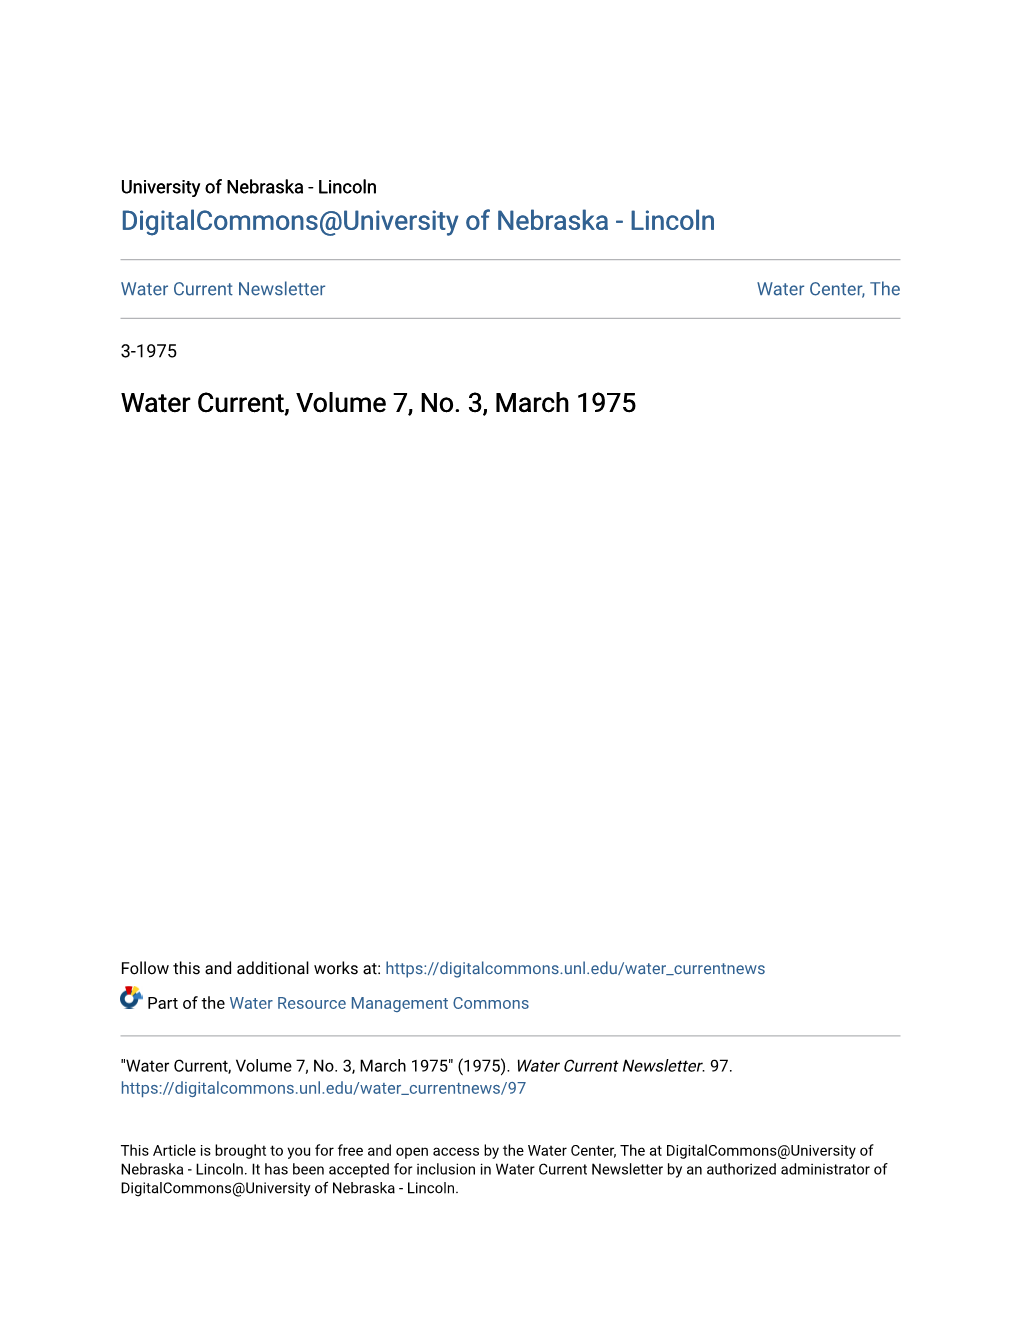 Water Current, Volume 7, No. 3, March 1975